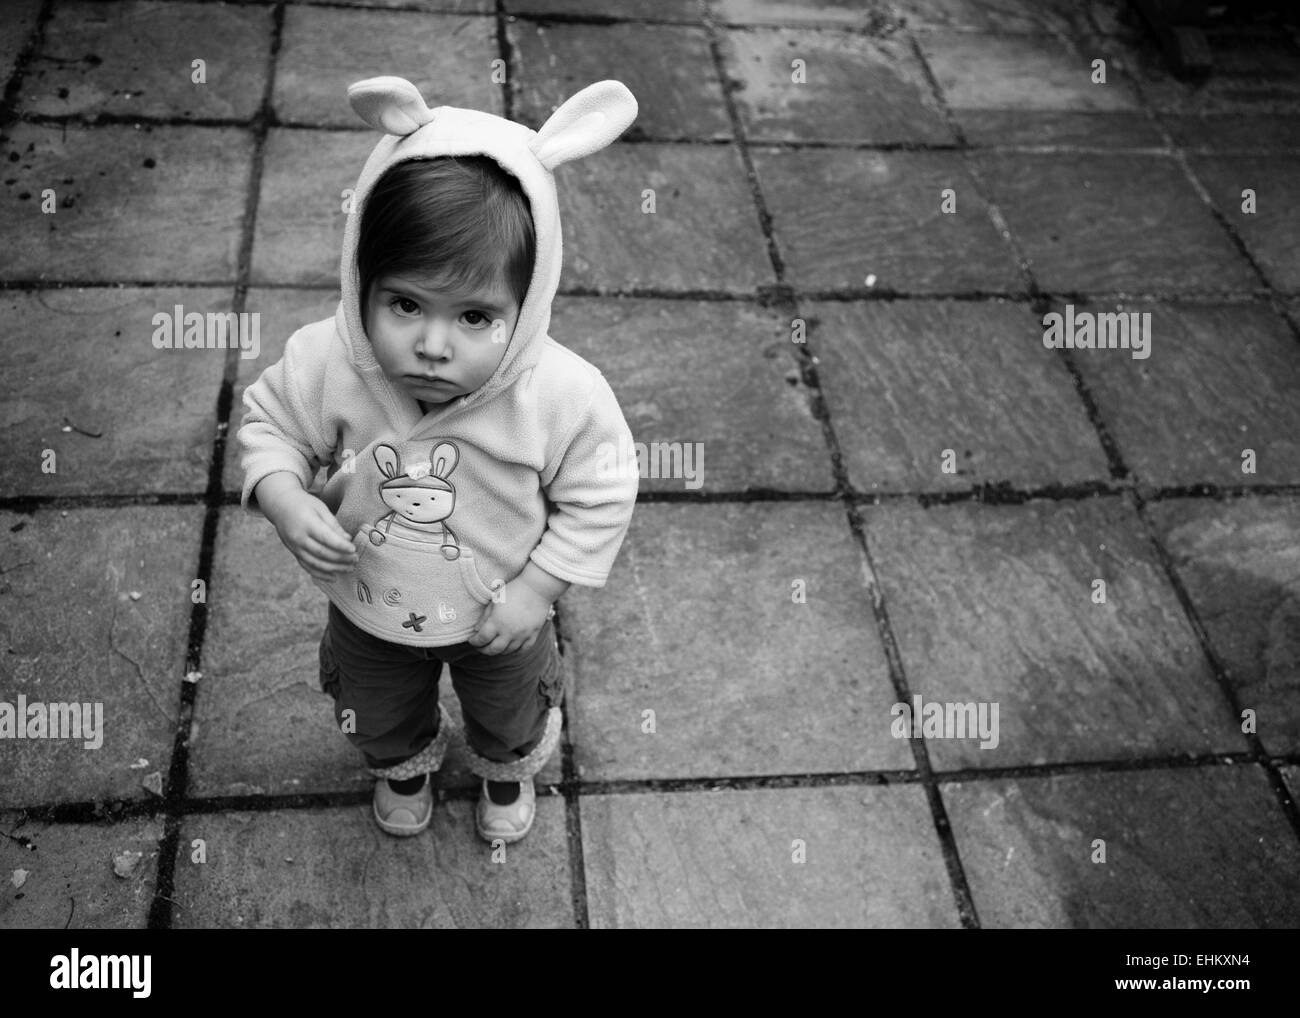 Little girl looking sad in hooded top with bunny ears Stock Photo